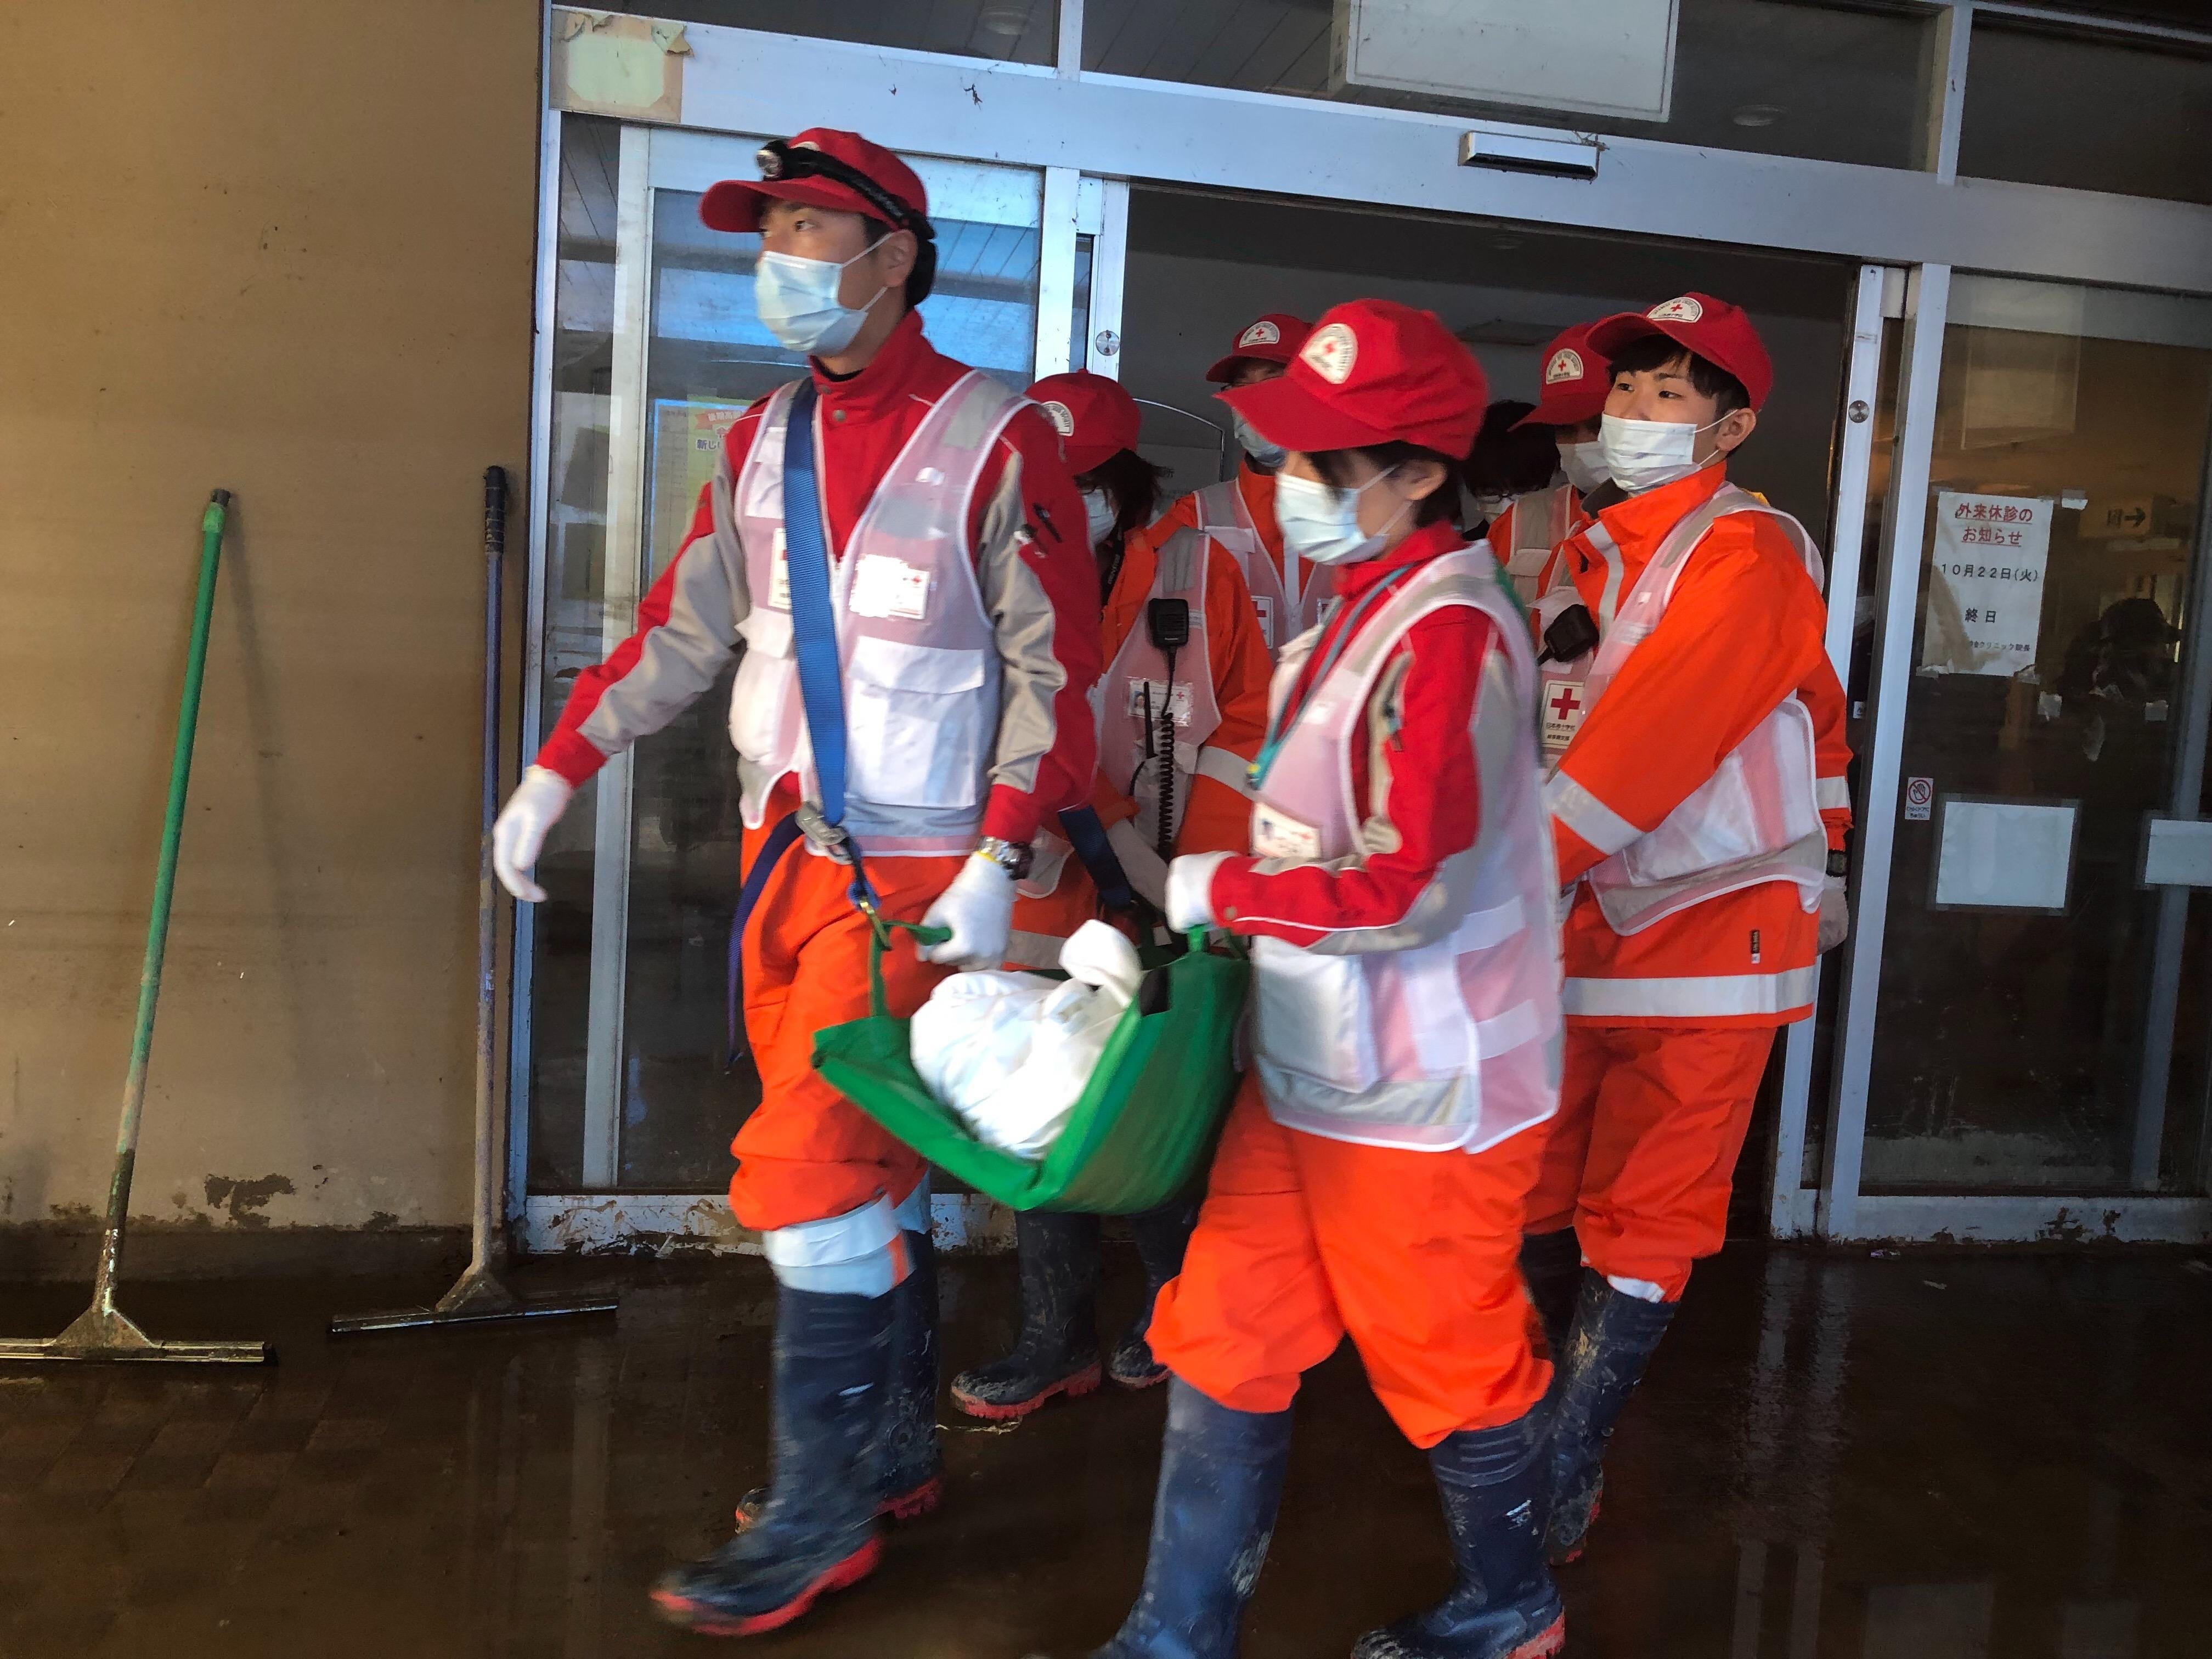 JRCS Medical Relief Teams are carrying the elderly person who needs support for evacuation